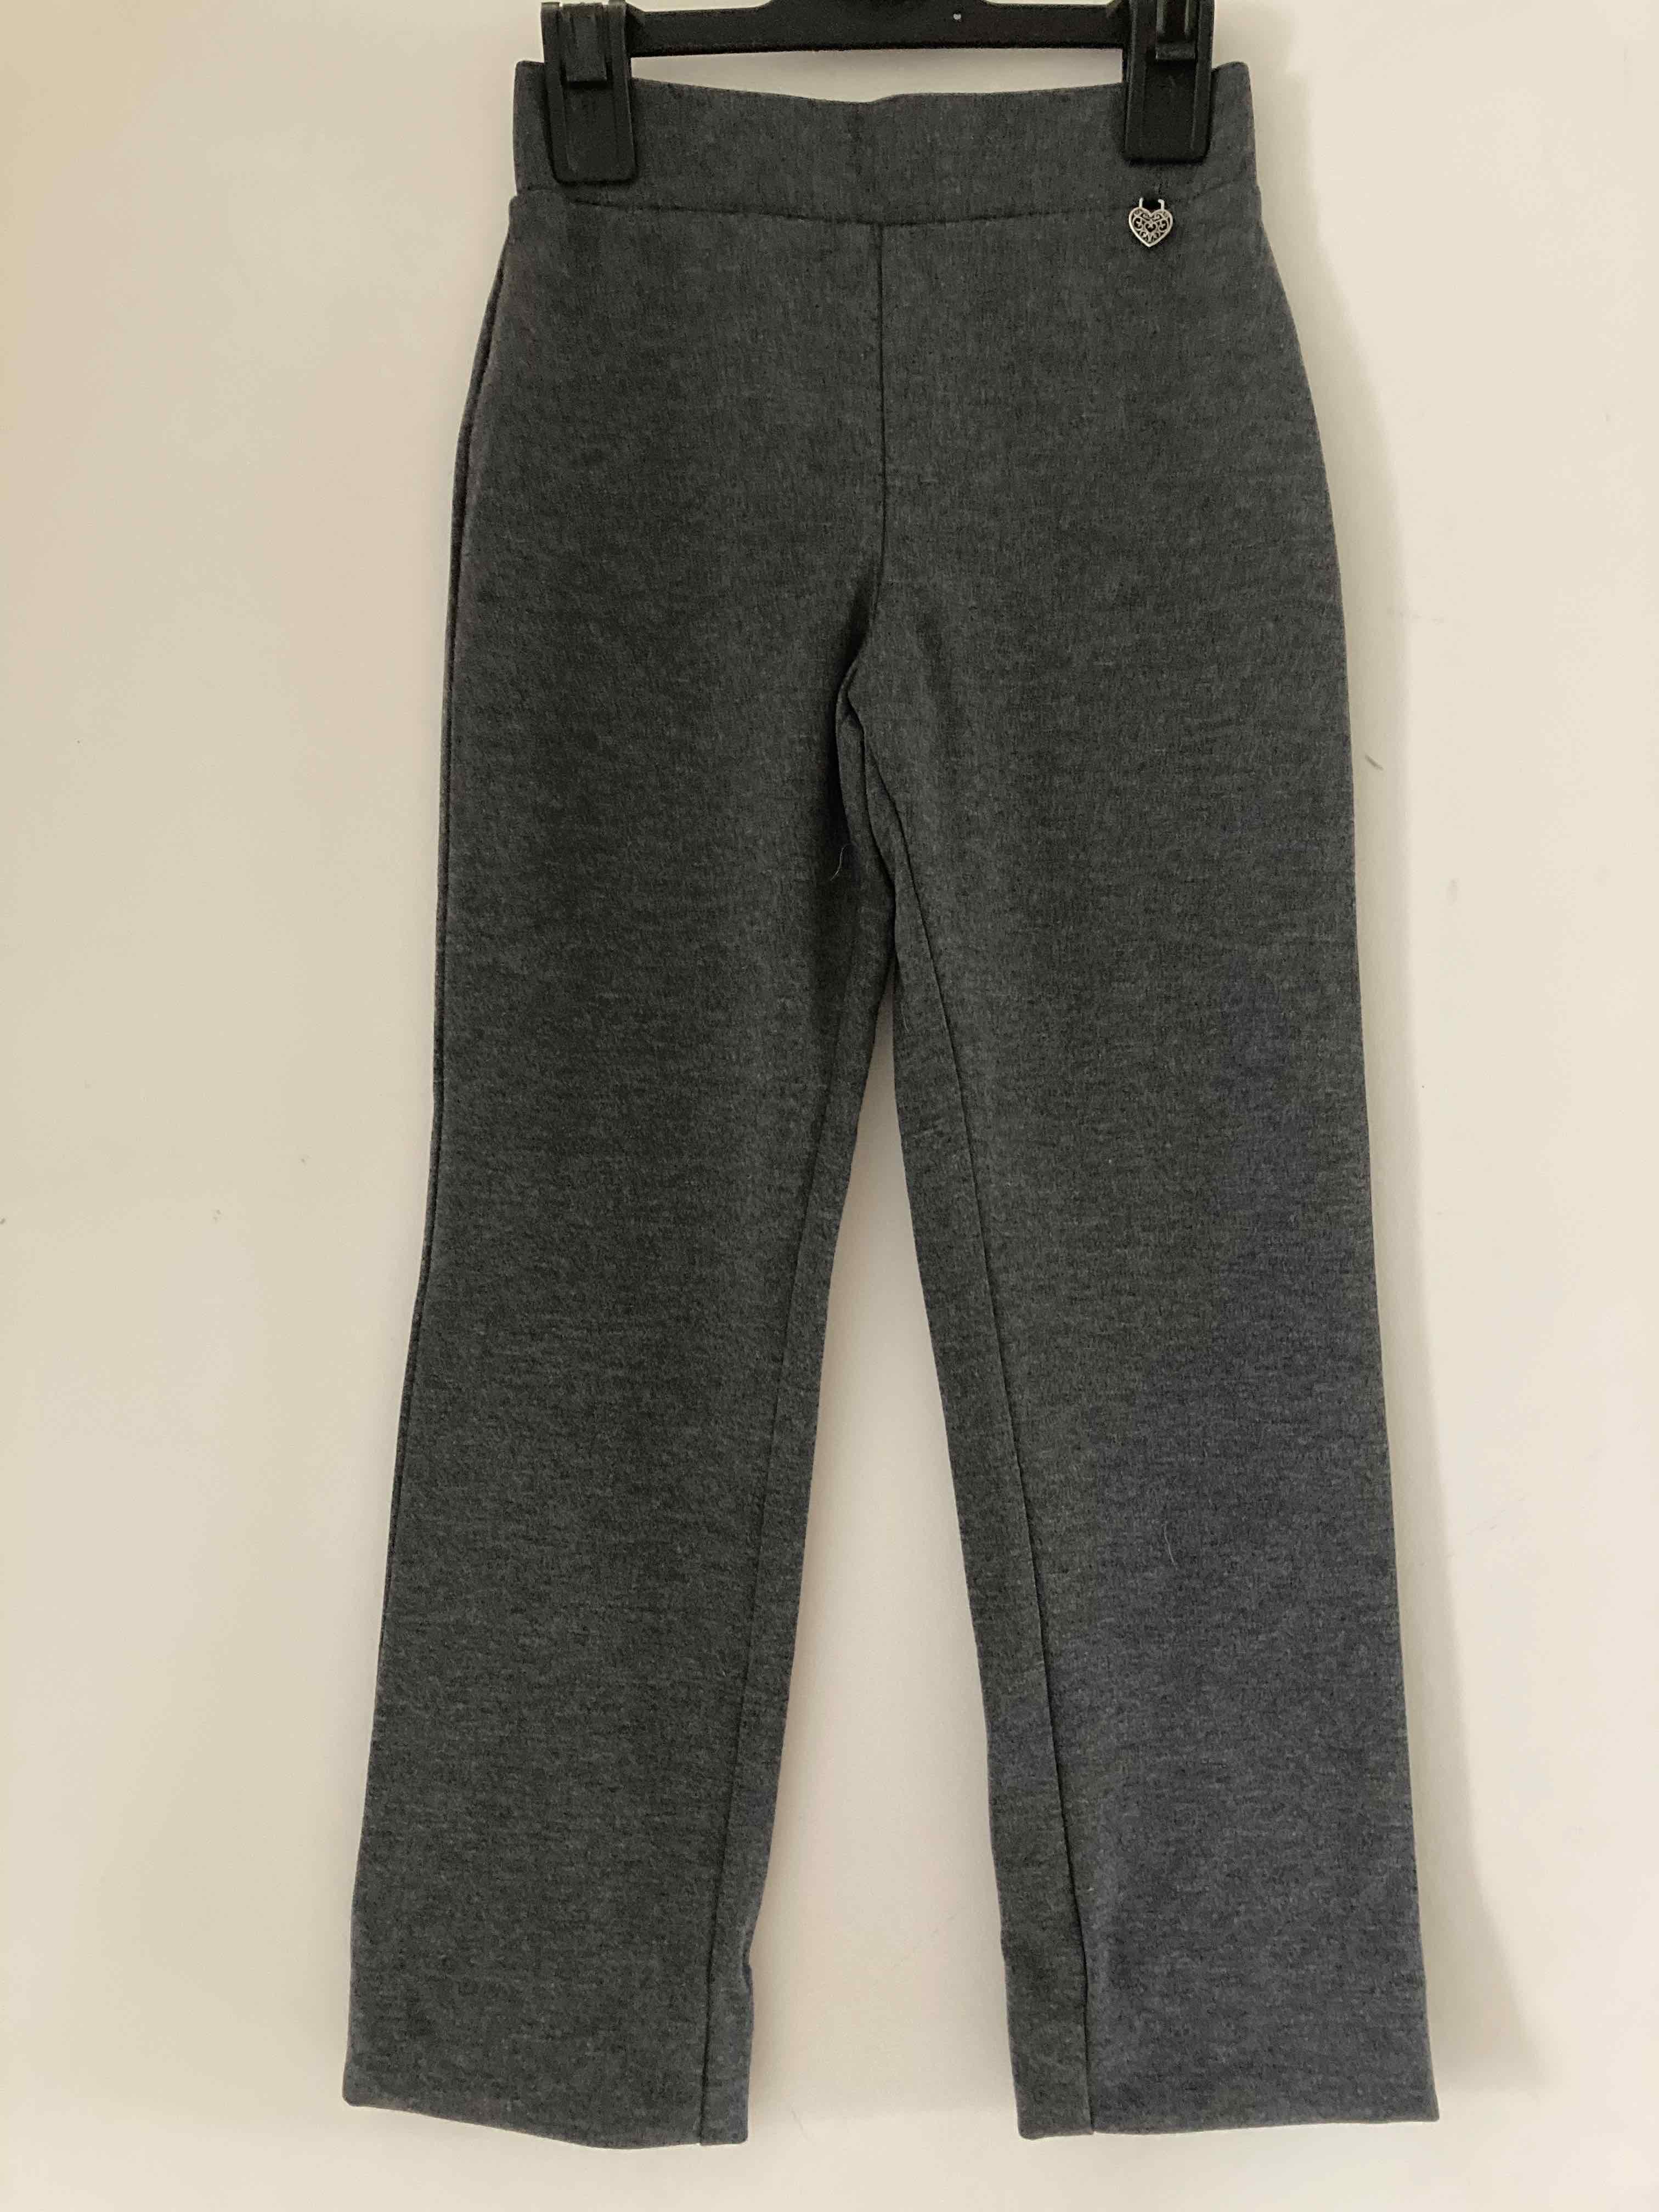 Girls' Grey School Trousers, Stretch Jersey, Plain Front, No Pockets 3-4 Y